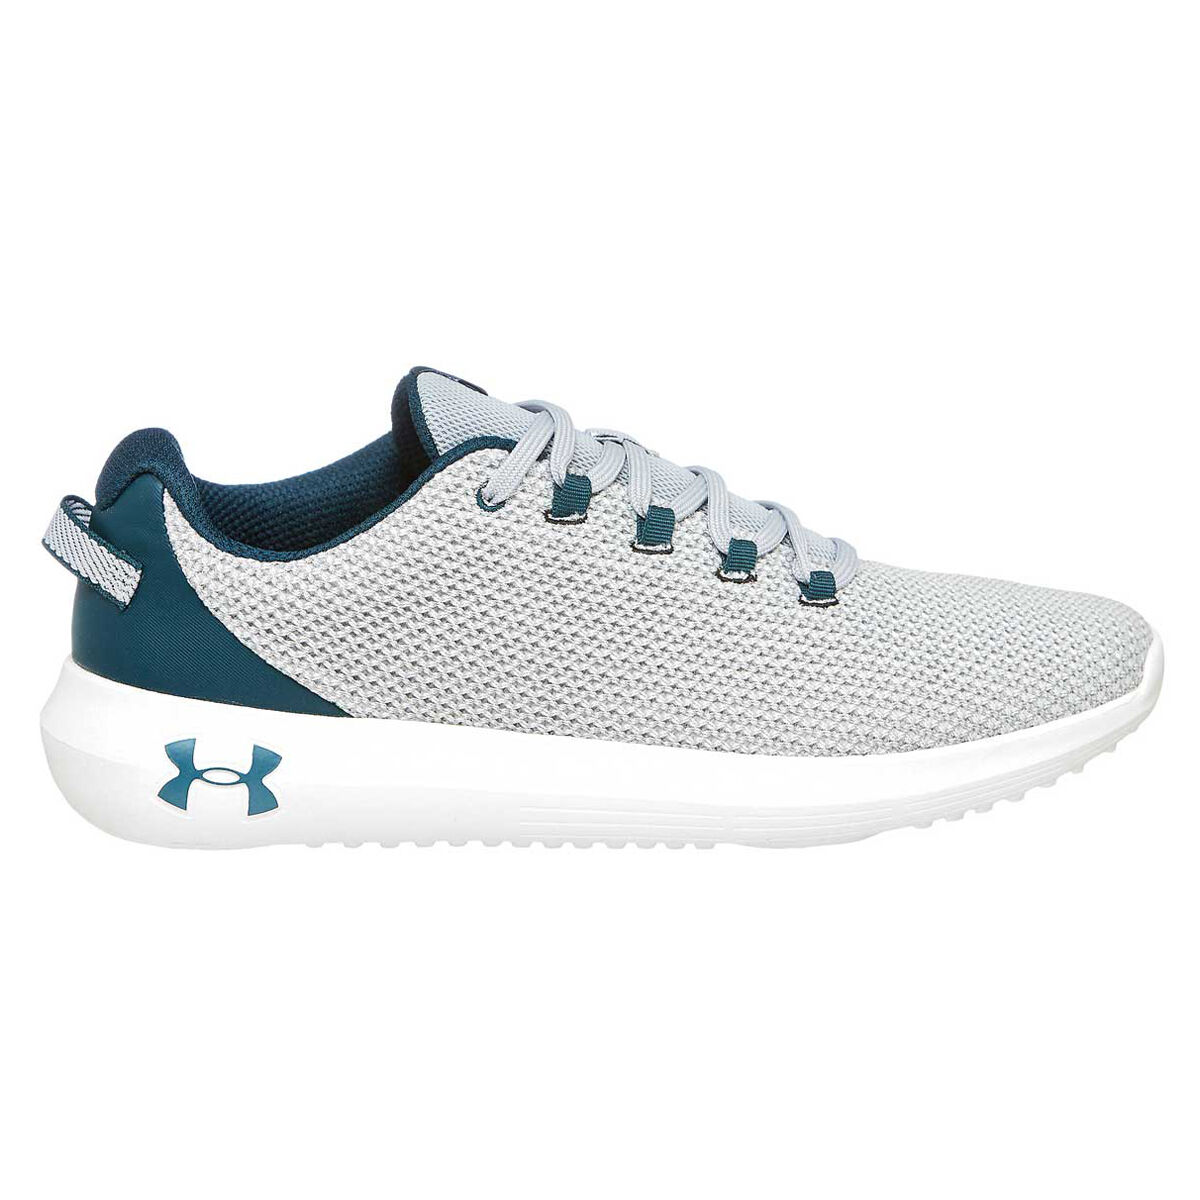 under armour ripple mens casual shoes